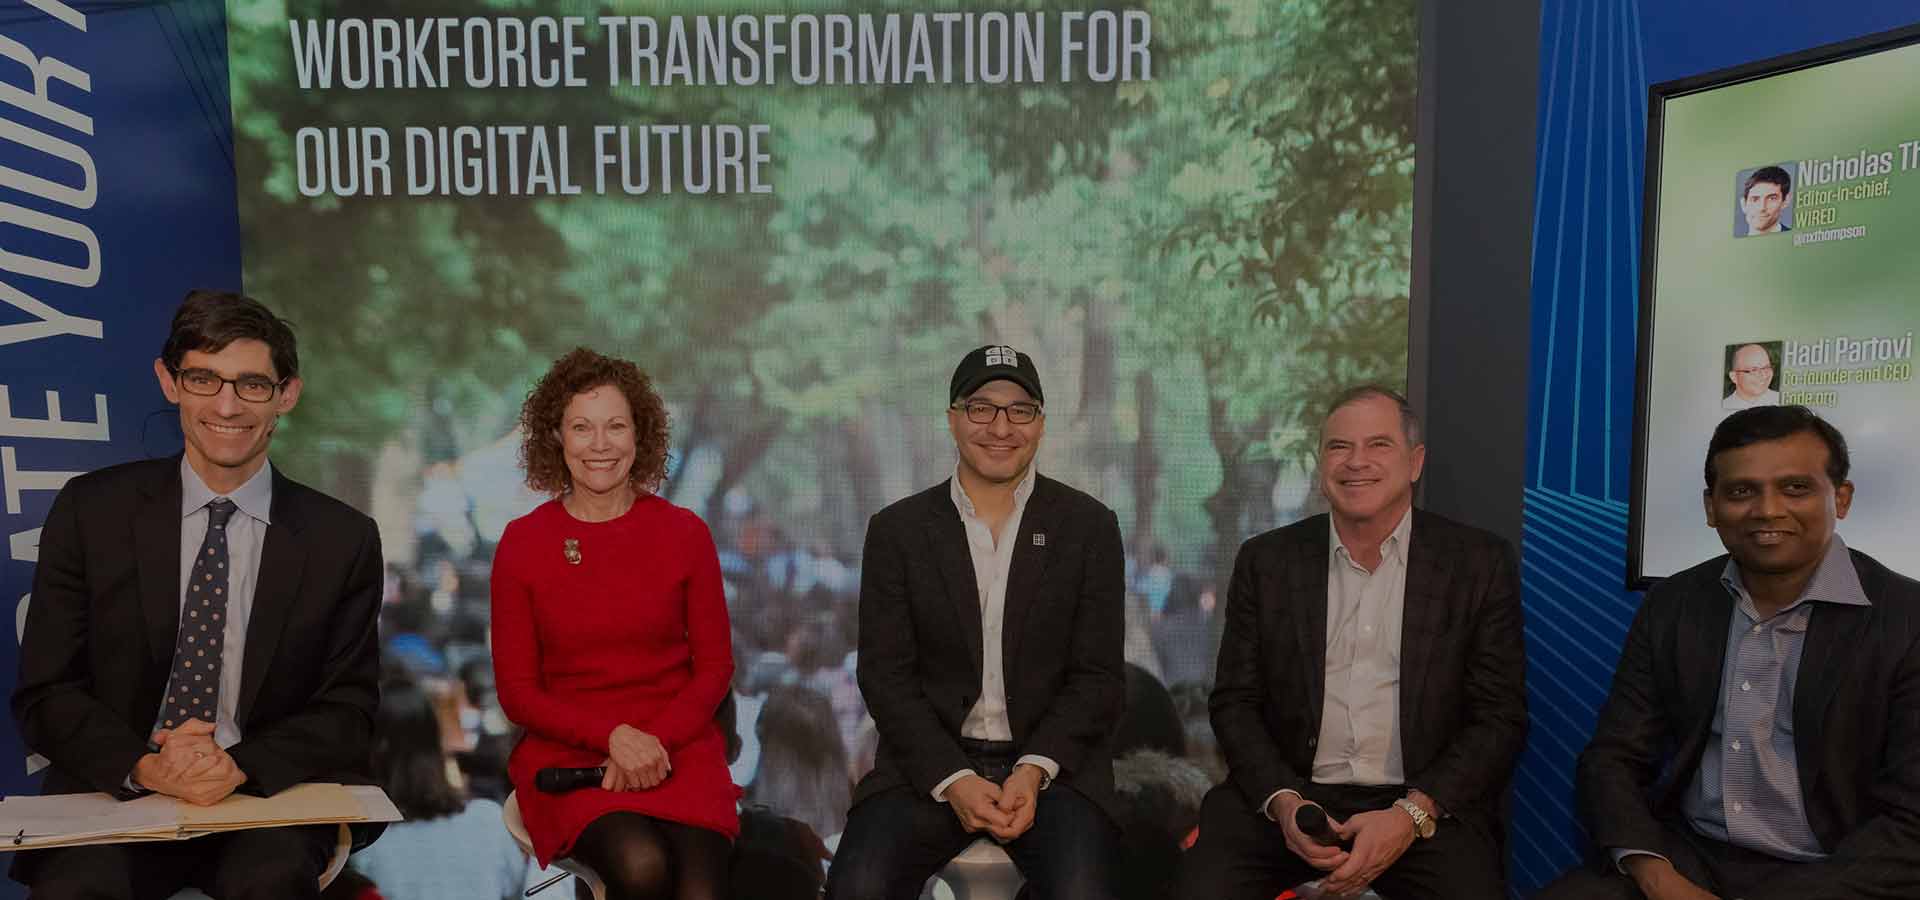 Workforce Transformation for our Digital Future